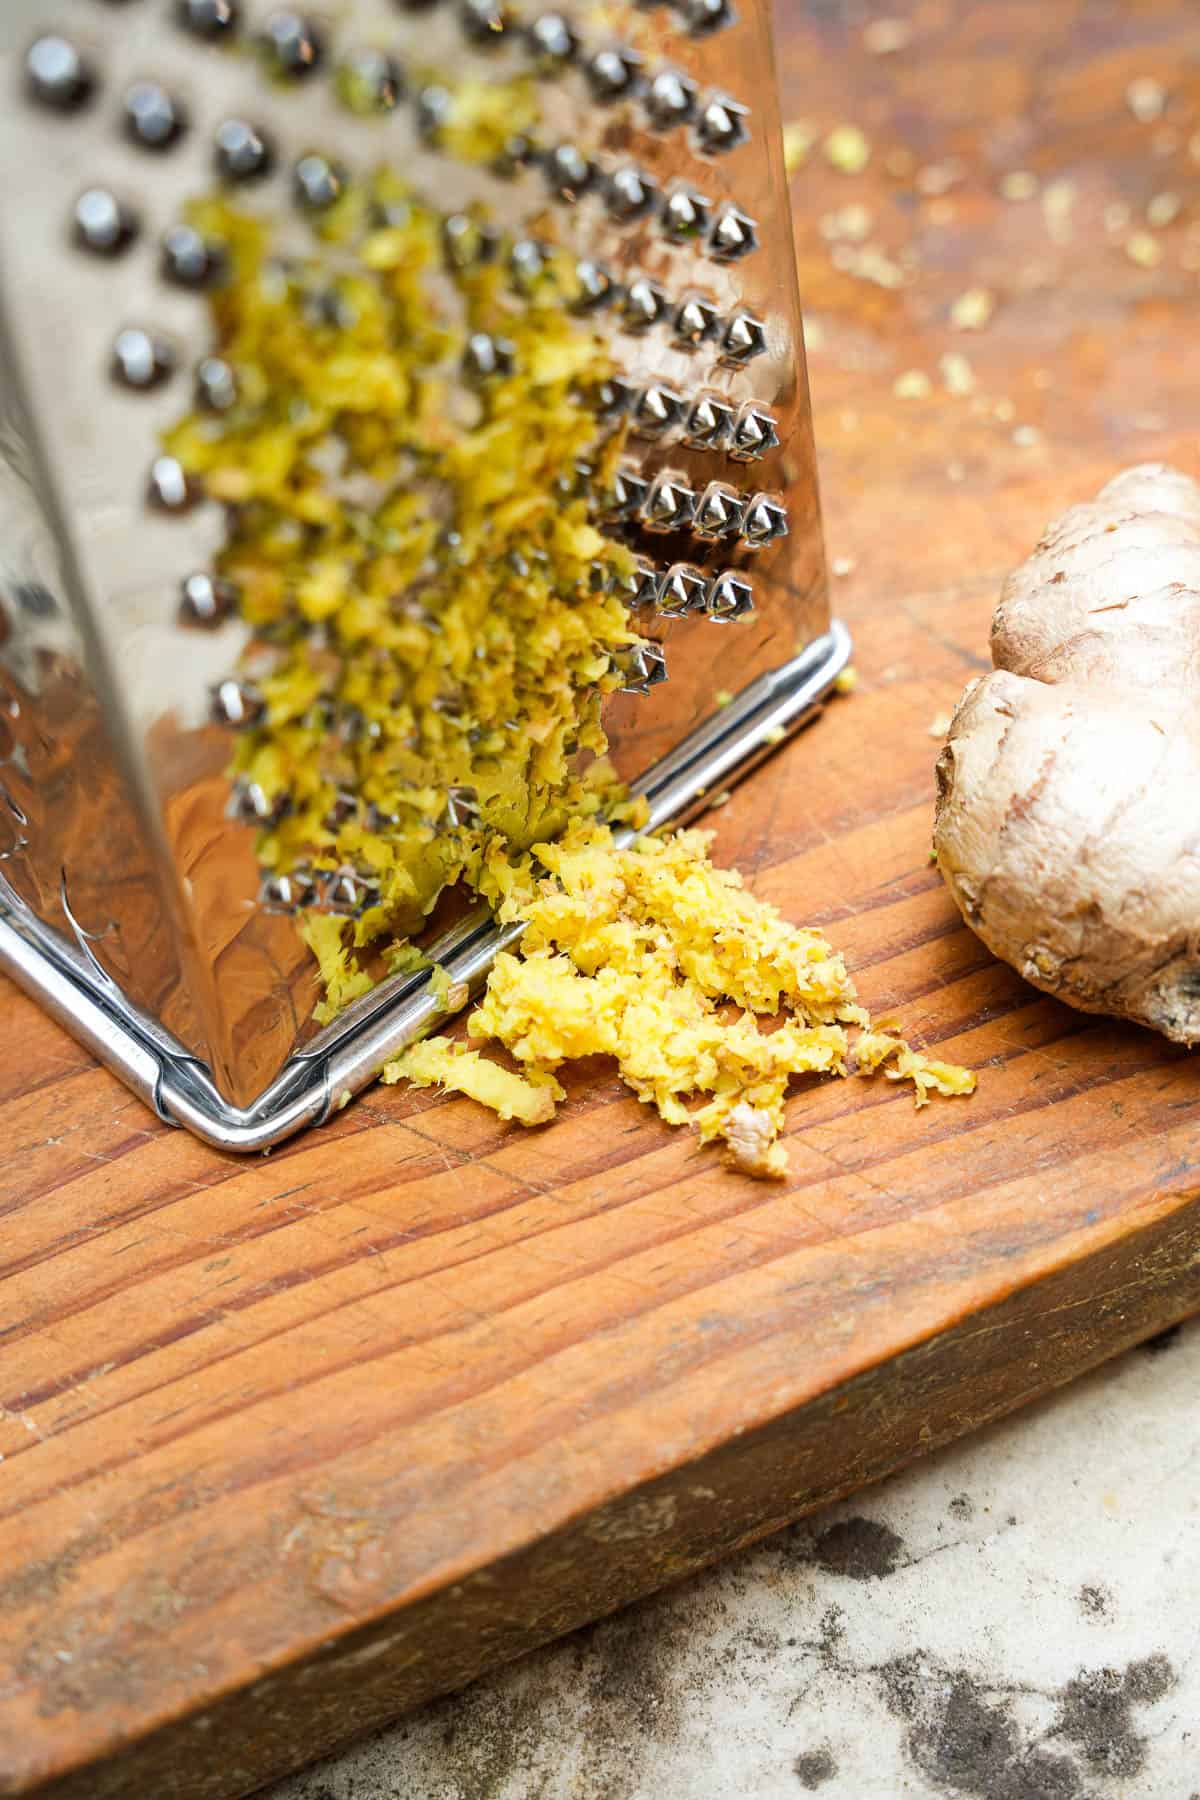 Ginger is grated using a box grater on a wooden cutting board.